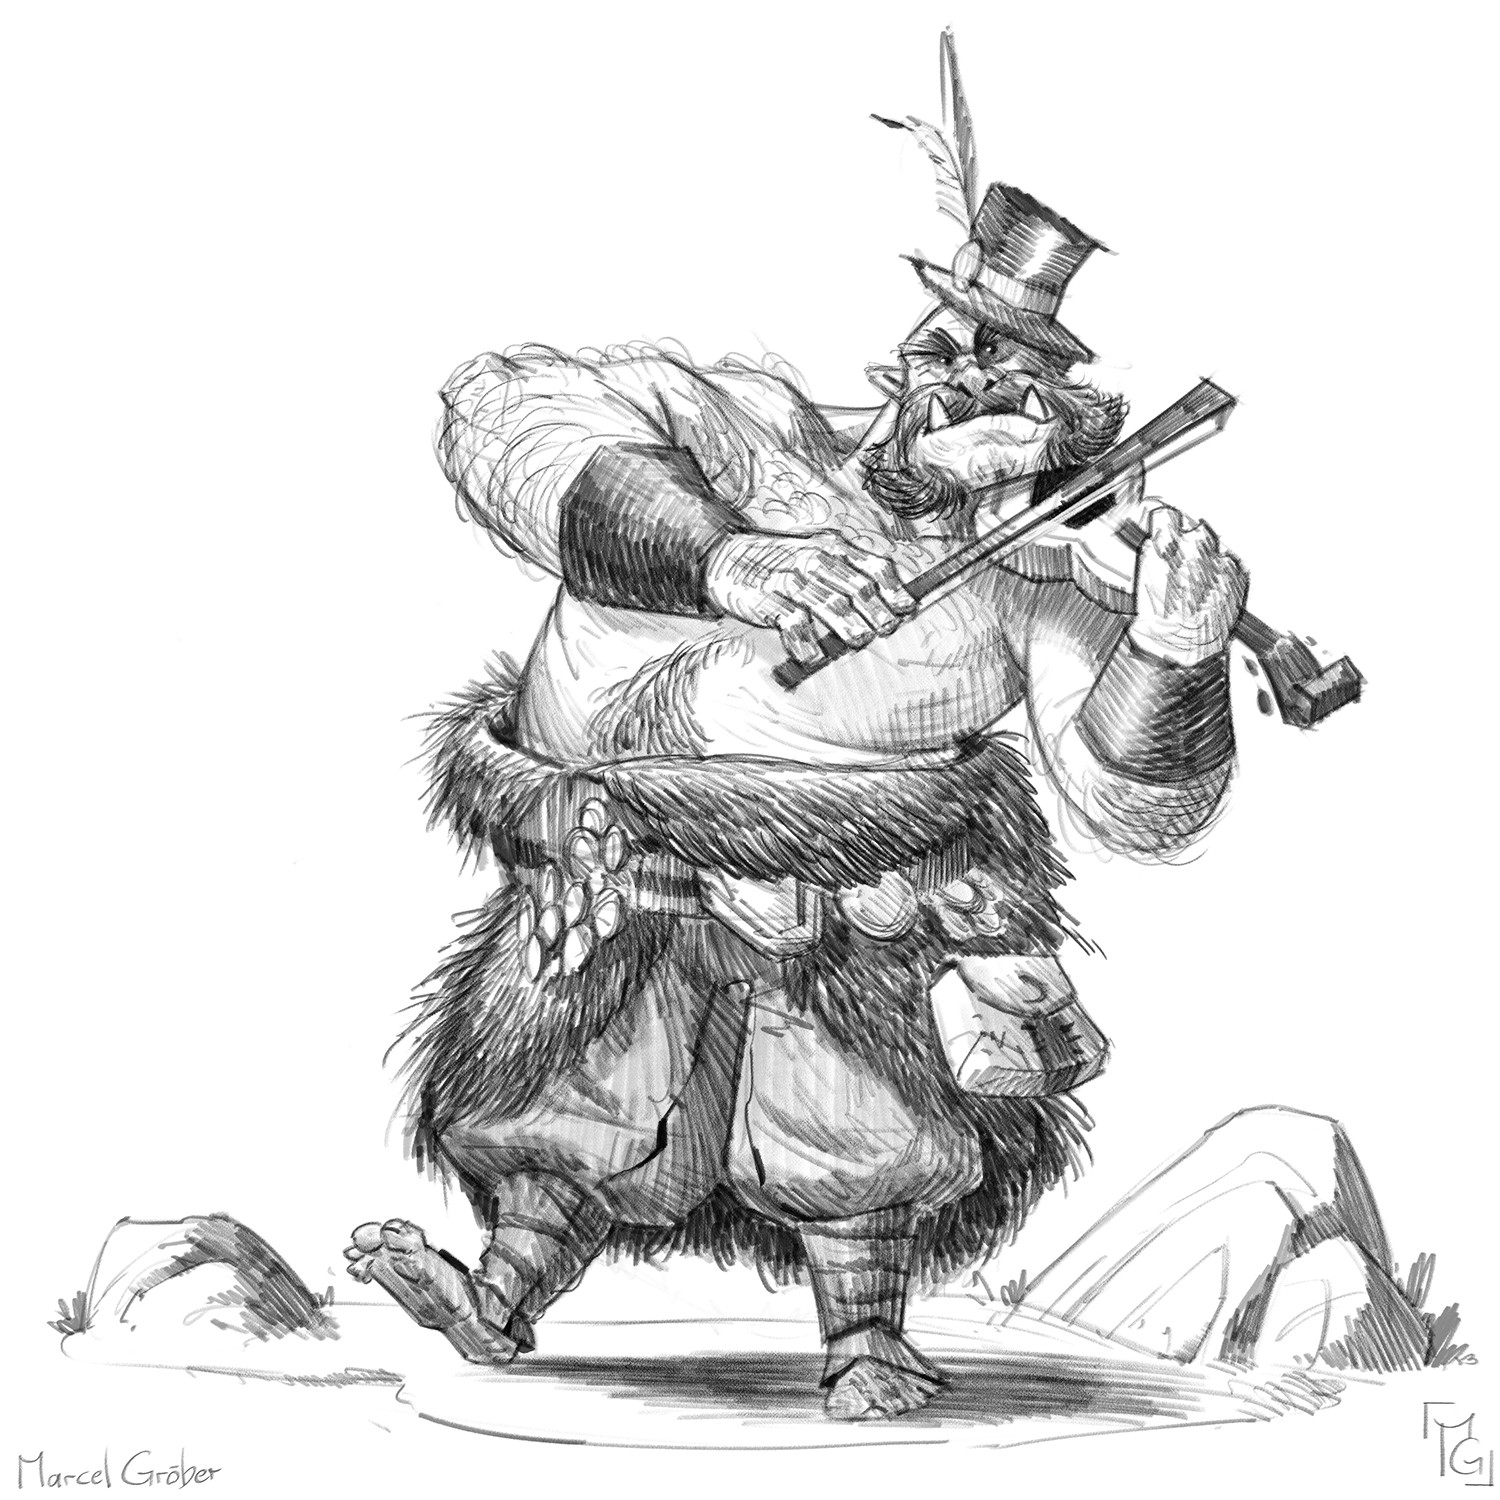 Hans Thunderfiddle, the rough and tough musician with the heart of gold